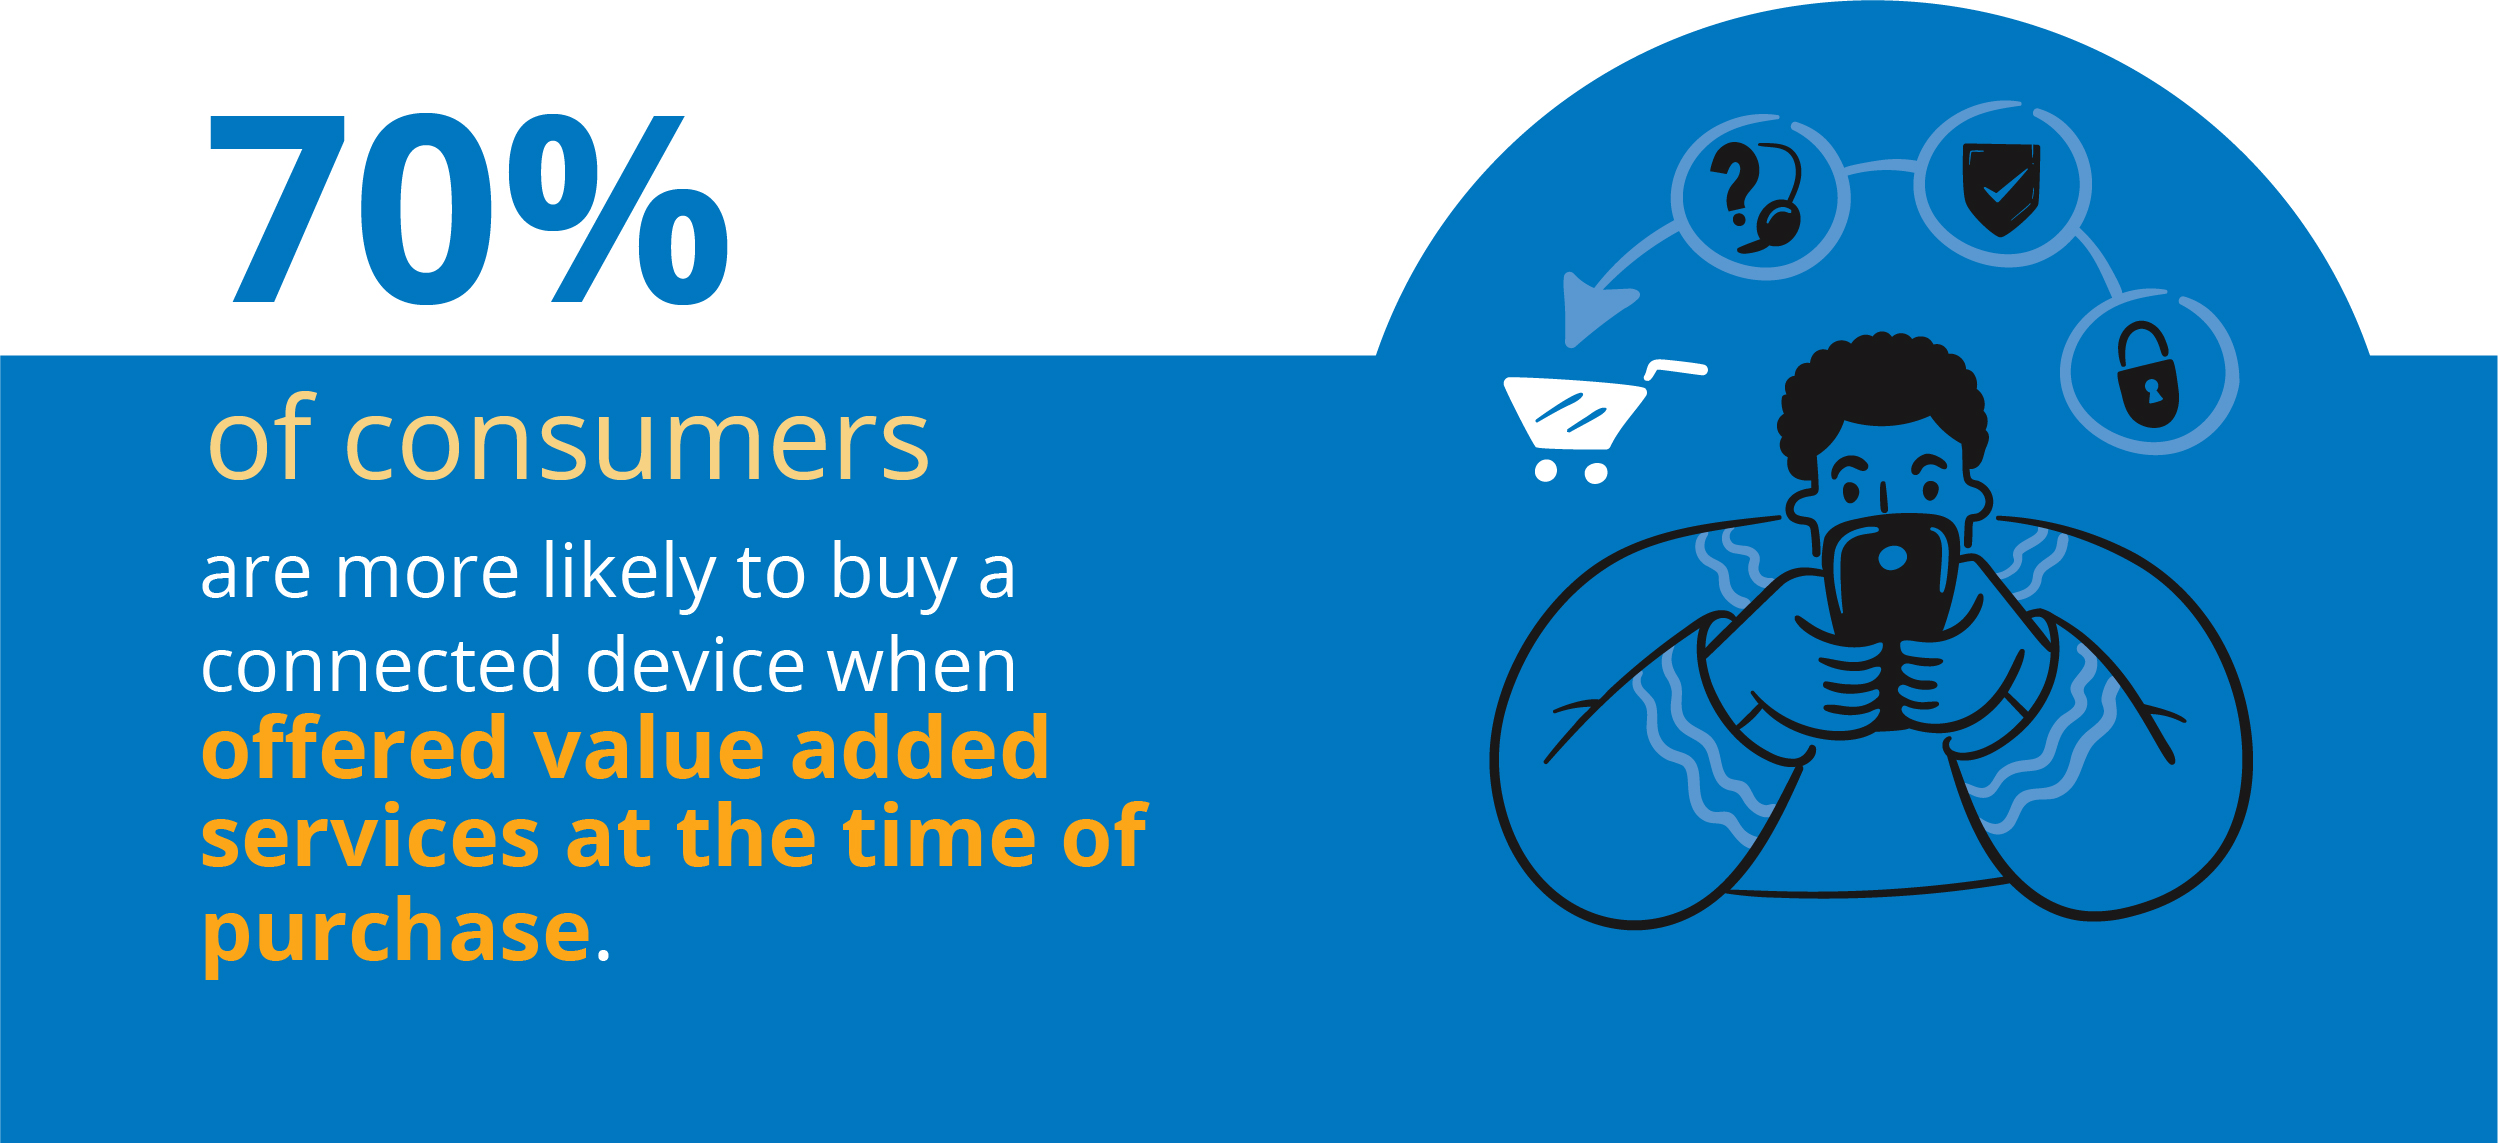 illustrated image indicating 70% of consumers would consider value added services if offered at the time of purchase